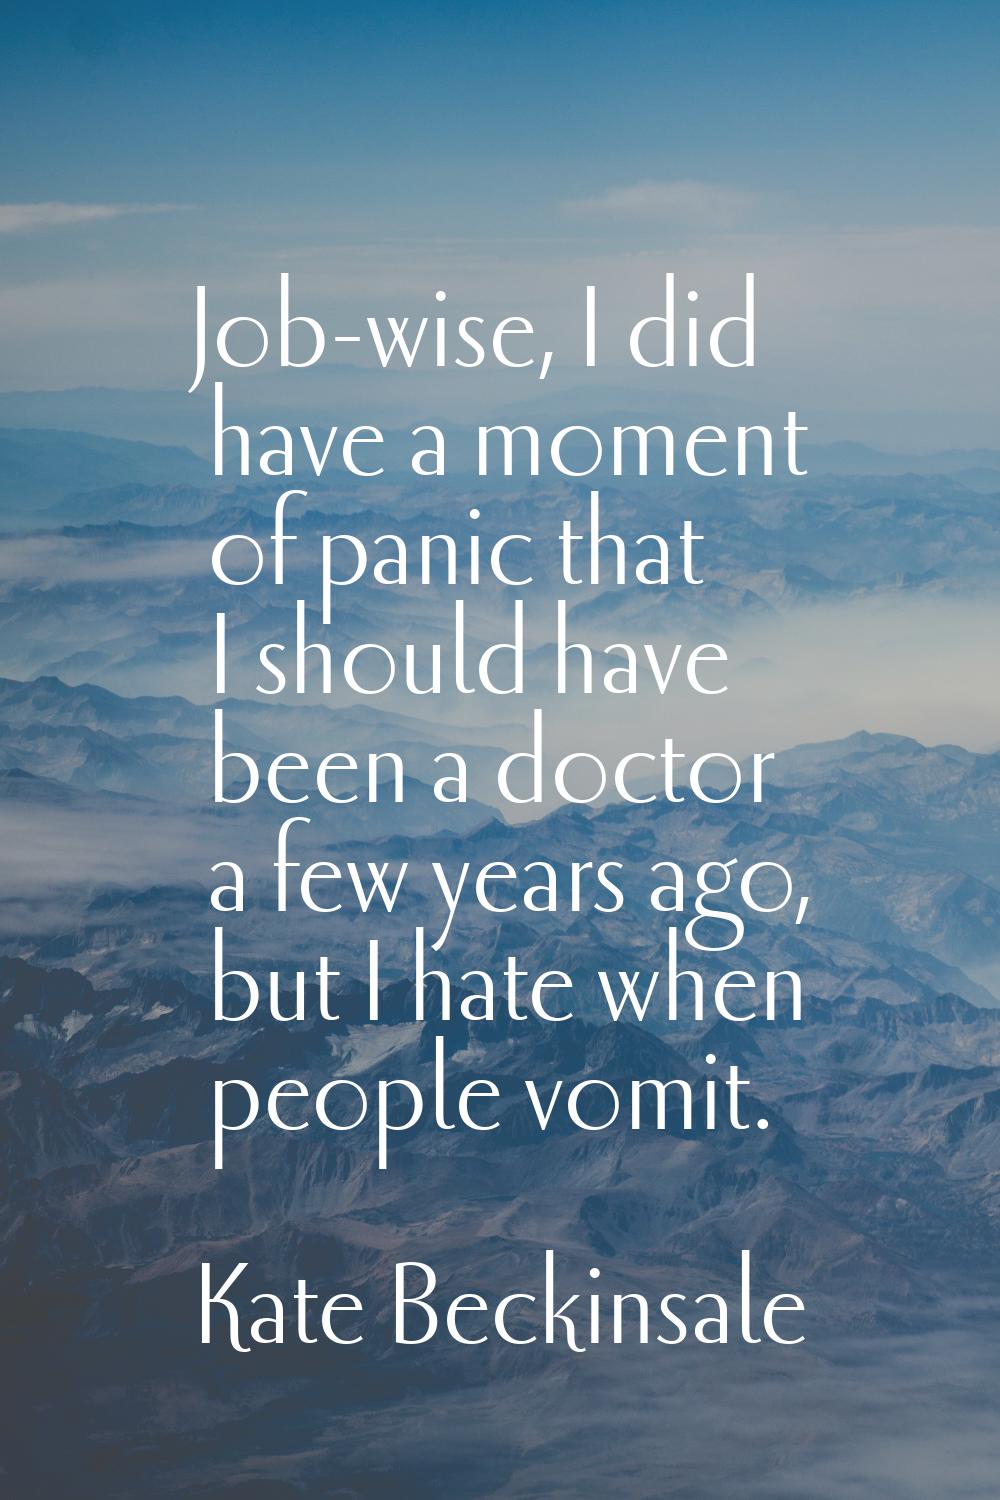 Job-wise, I did have a moment of panic that I should have been a doctor a few years ago, but I hate